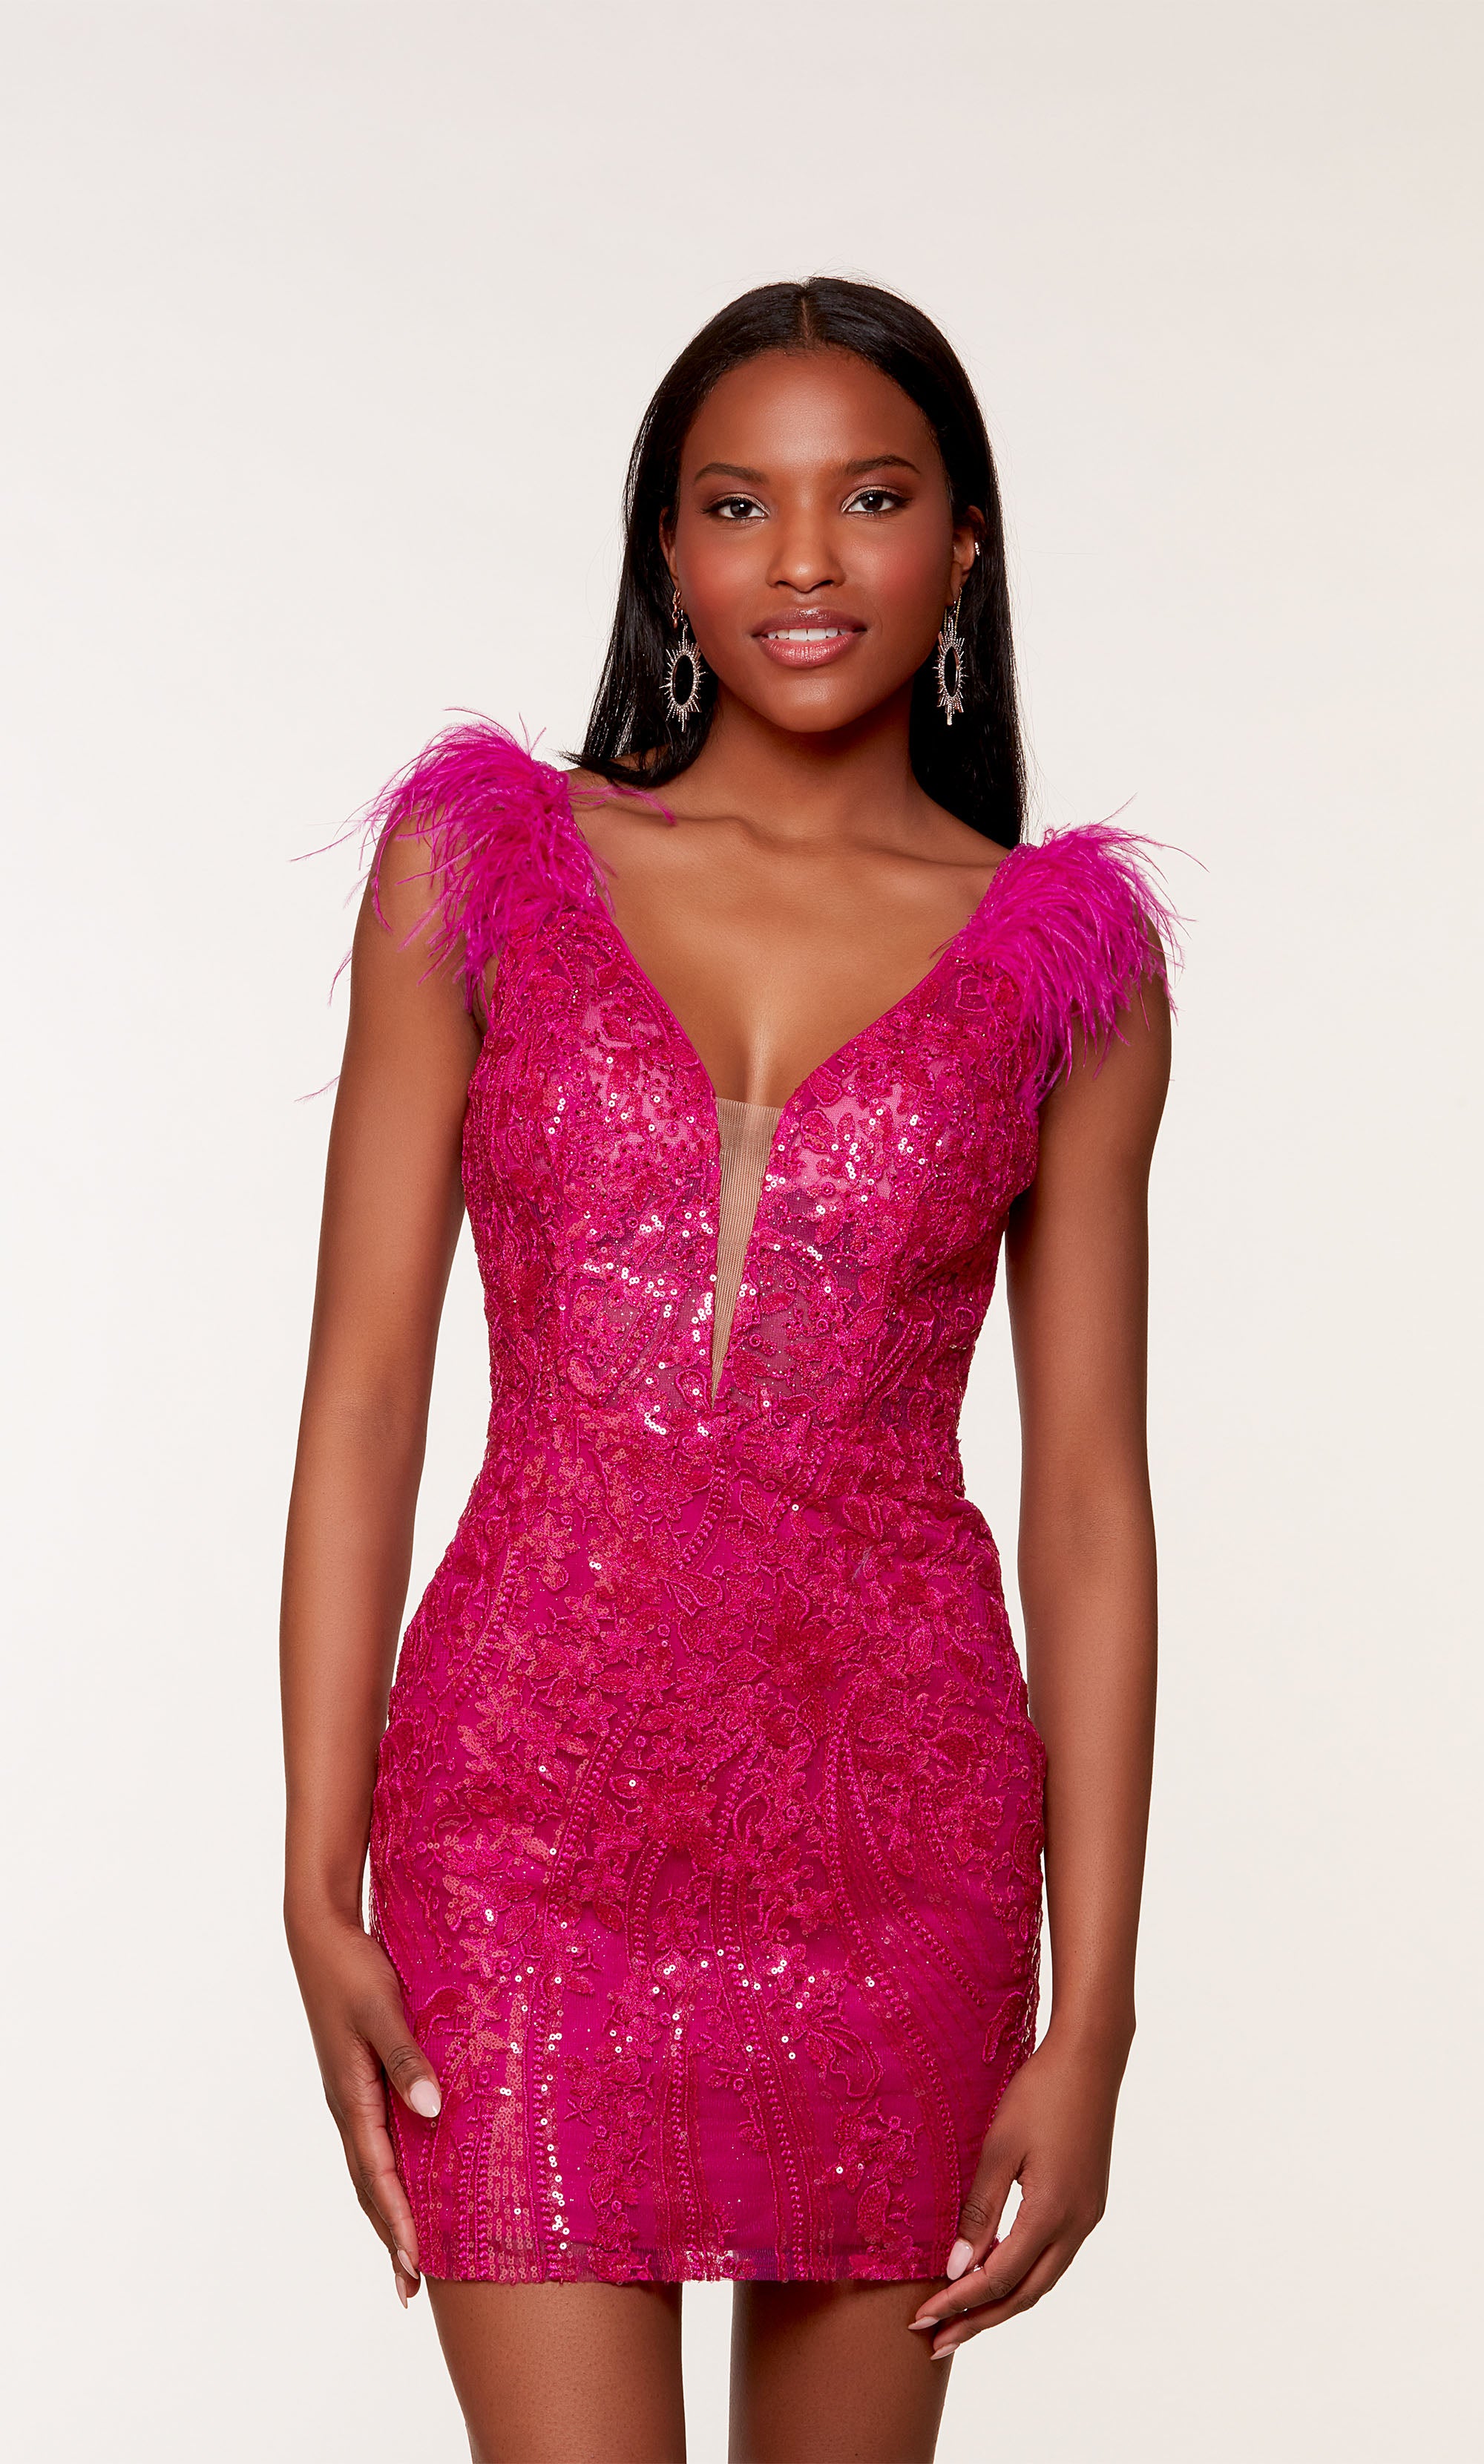 A vibrant pink short feather dress with a plunging neckline, open back, and intricate sequin embellishment throughout.